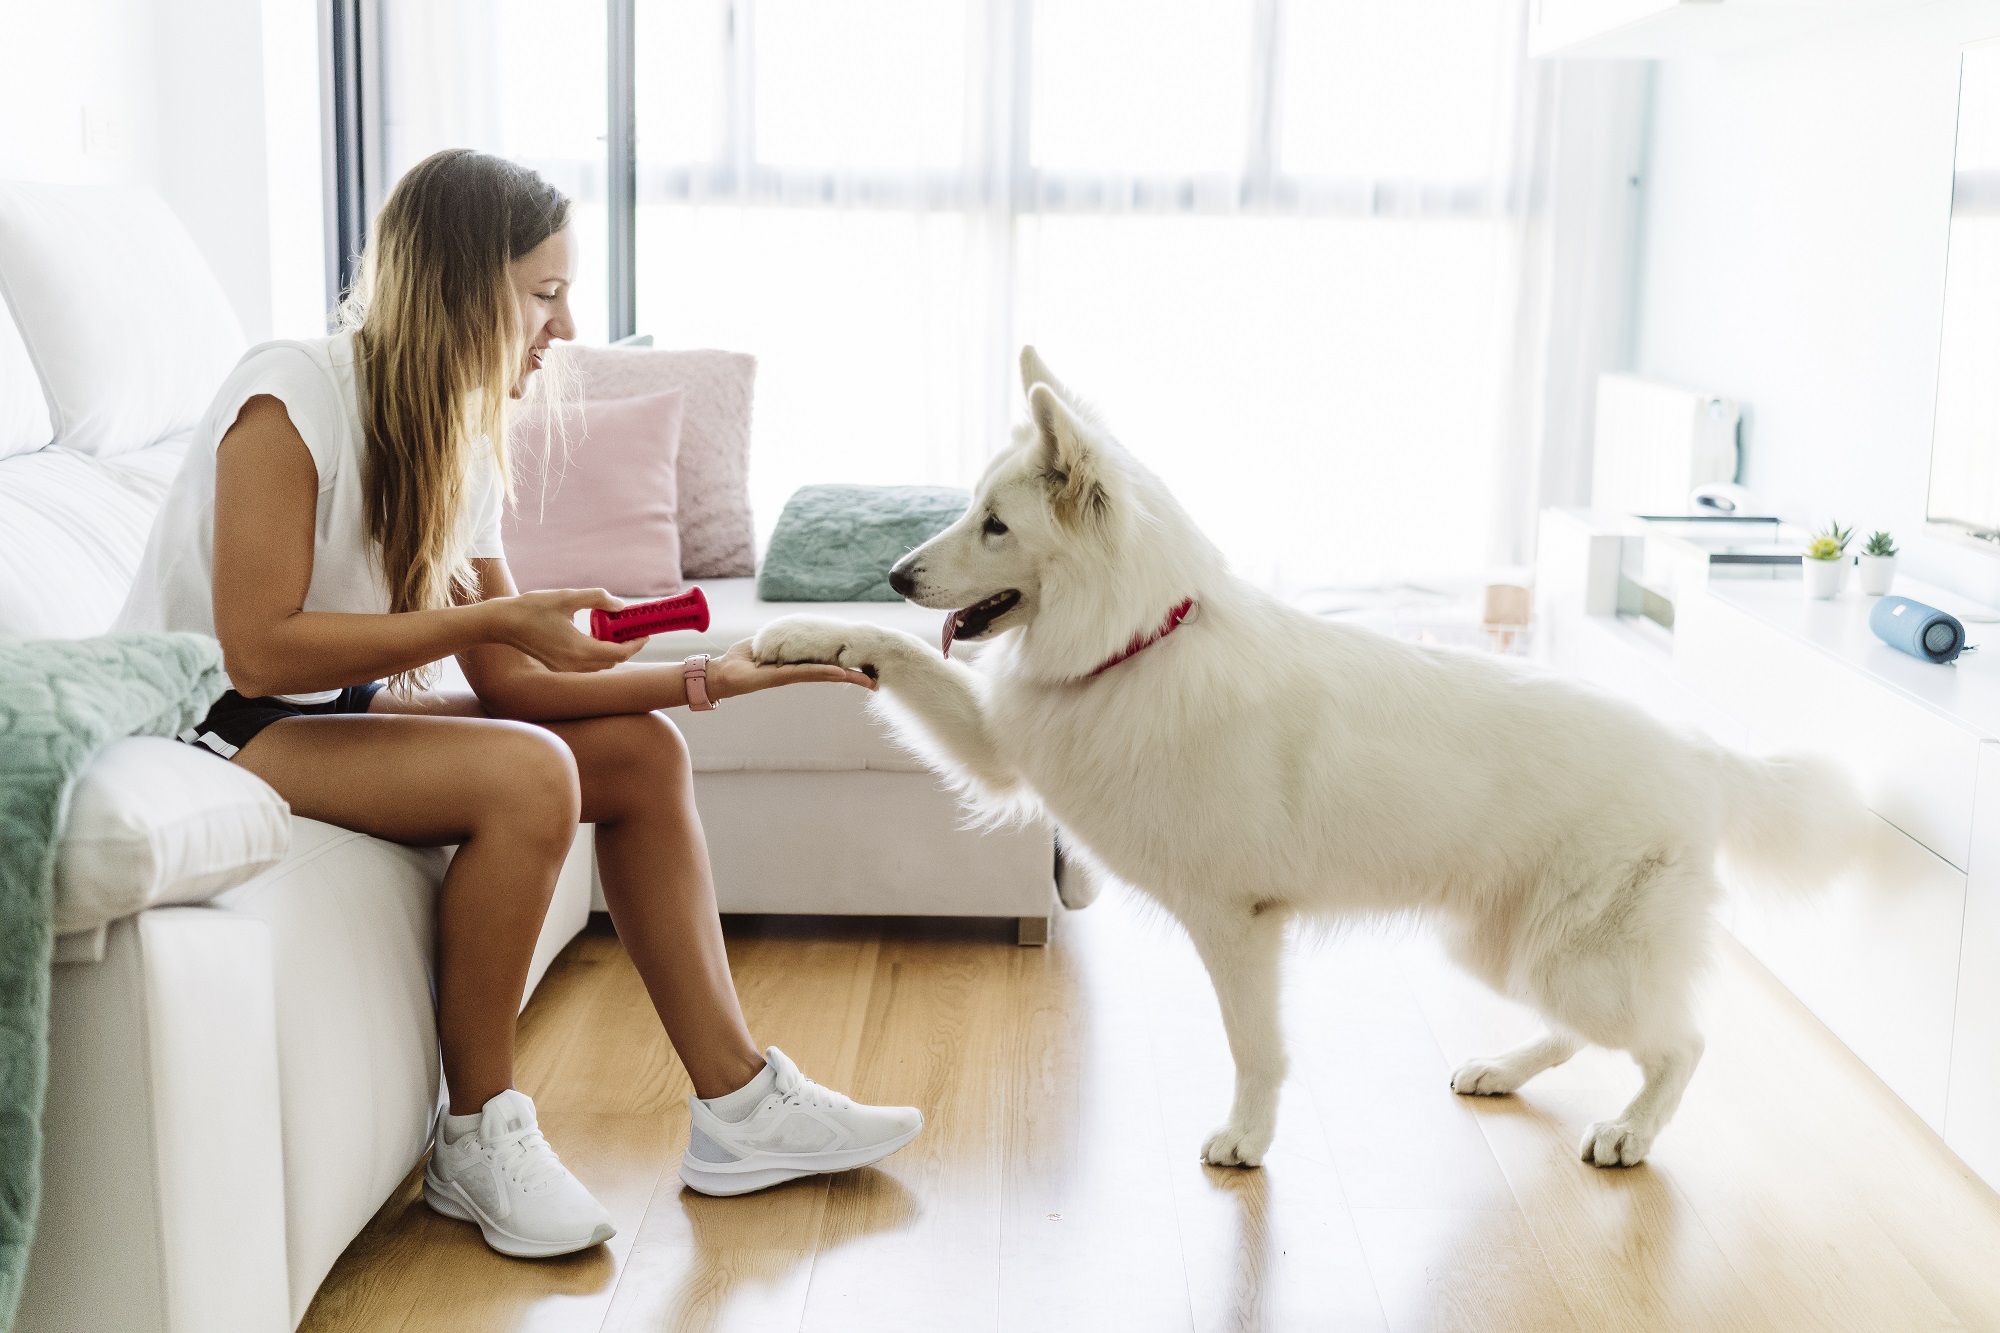 How to interview for pet care jobs